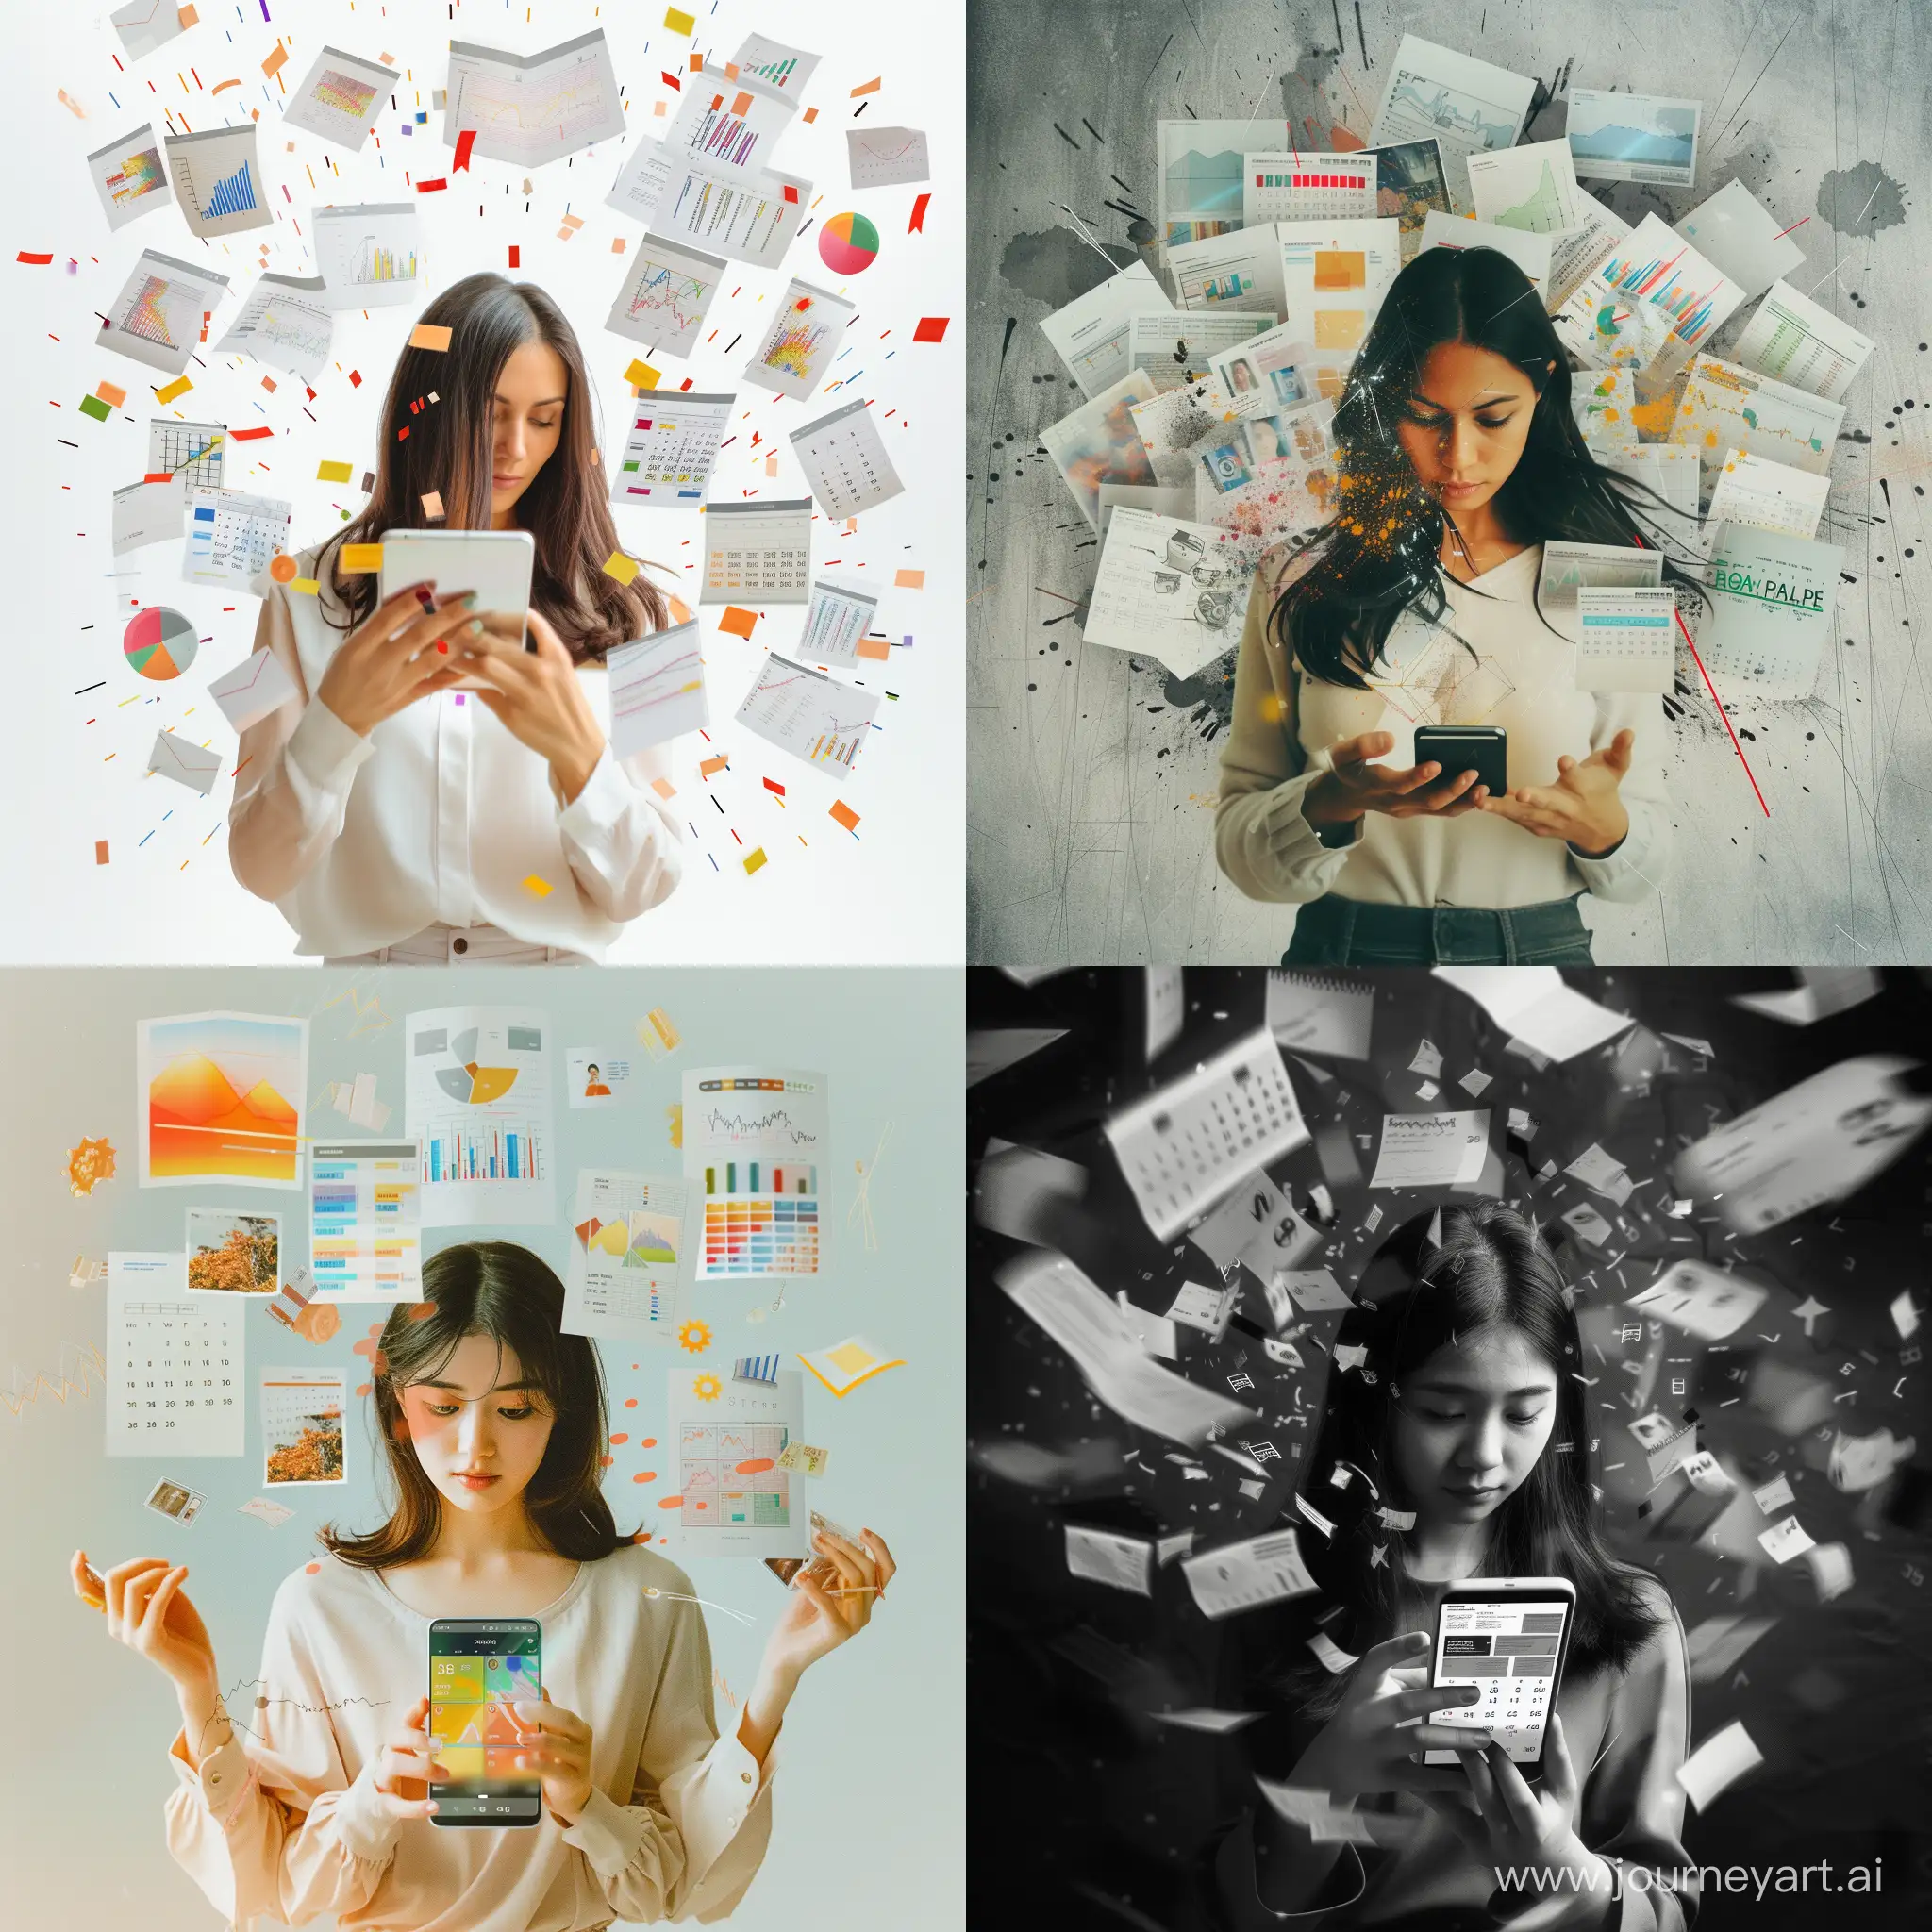 Woman-with-Smartphone-Surrounded-by-Dynamic-Digital-Data-and-35mm-Photo-Film-Quality-Imagery